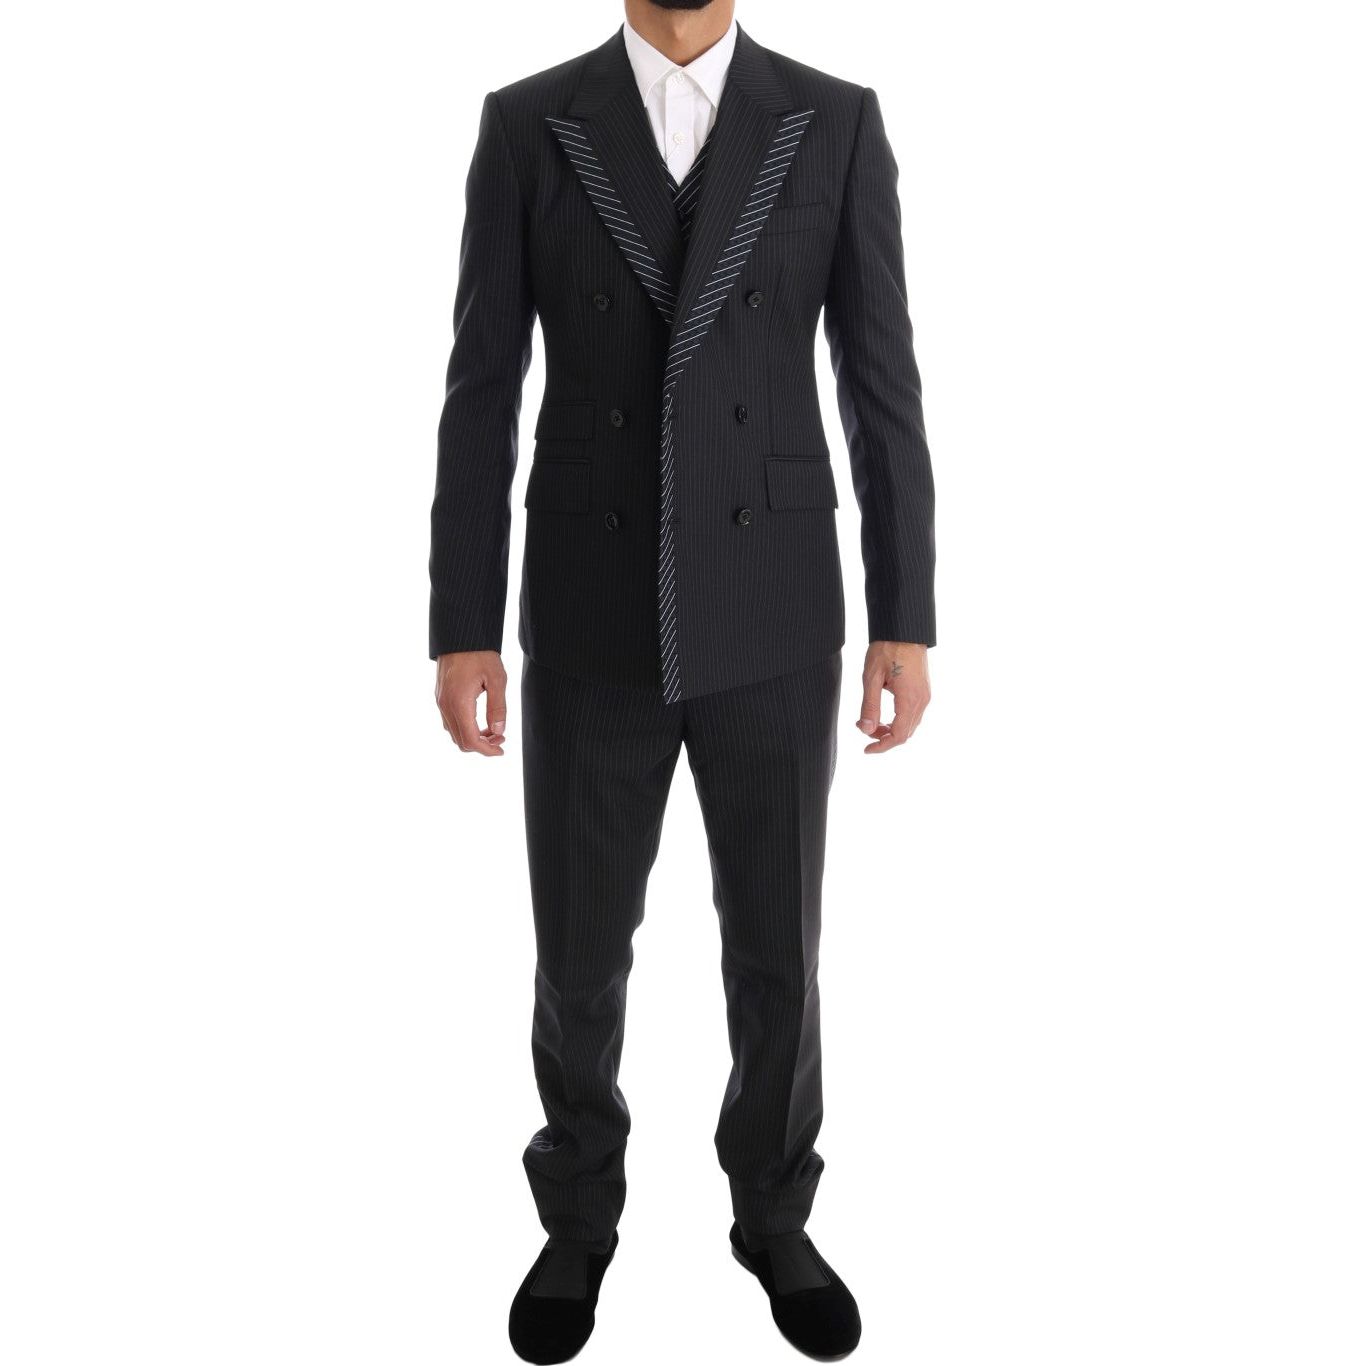 Dolce & Gabbana Elegant Gray Striped Wool Silk Men's 3-Piece Suit gray-double-breasted-3-piece-suit Suit 460447-gray-double-breasted-3-piece-suit-5.jpg